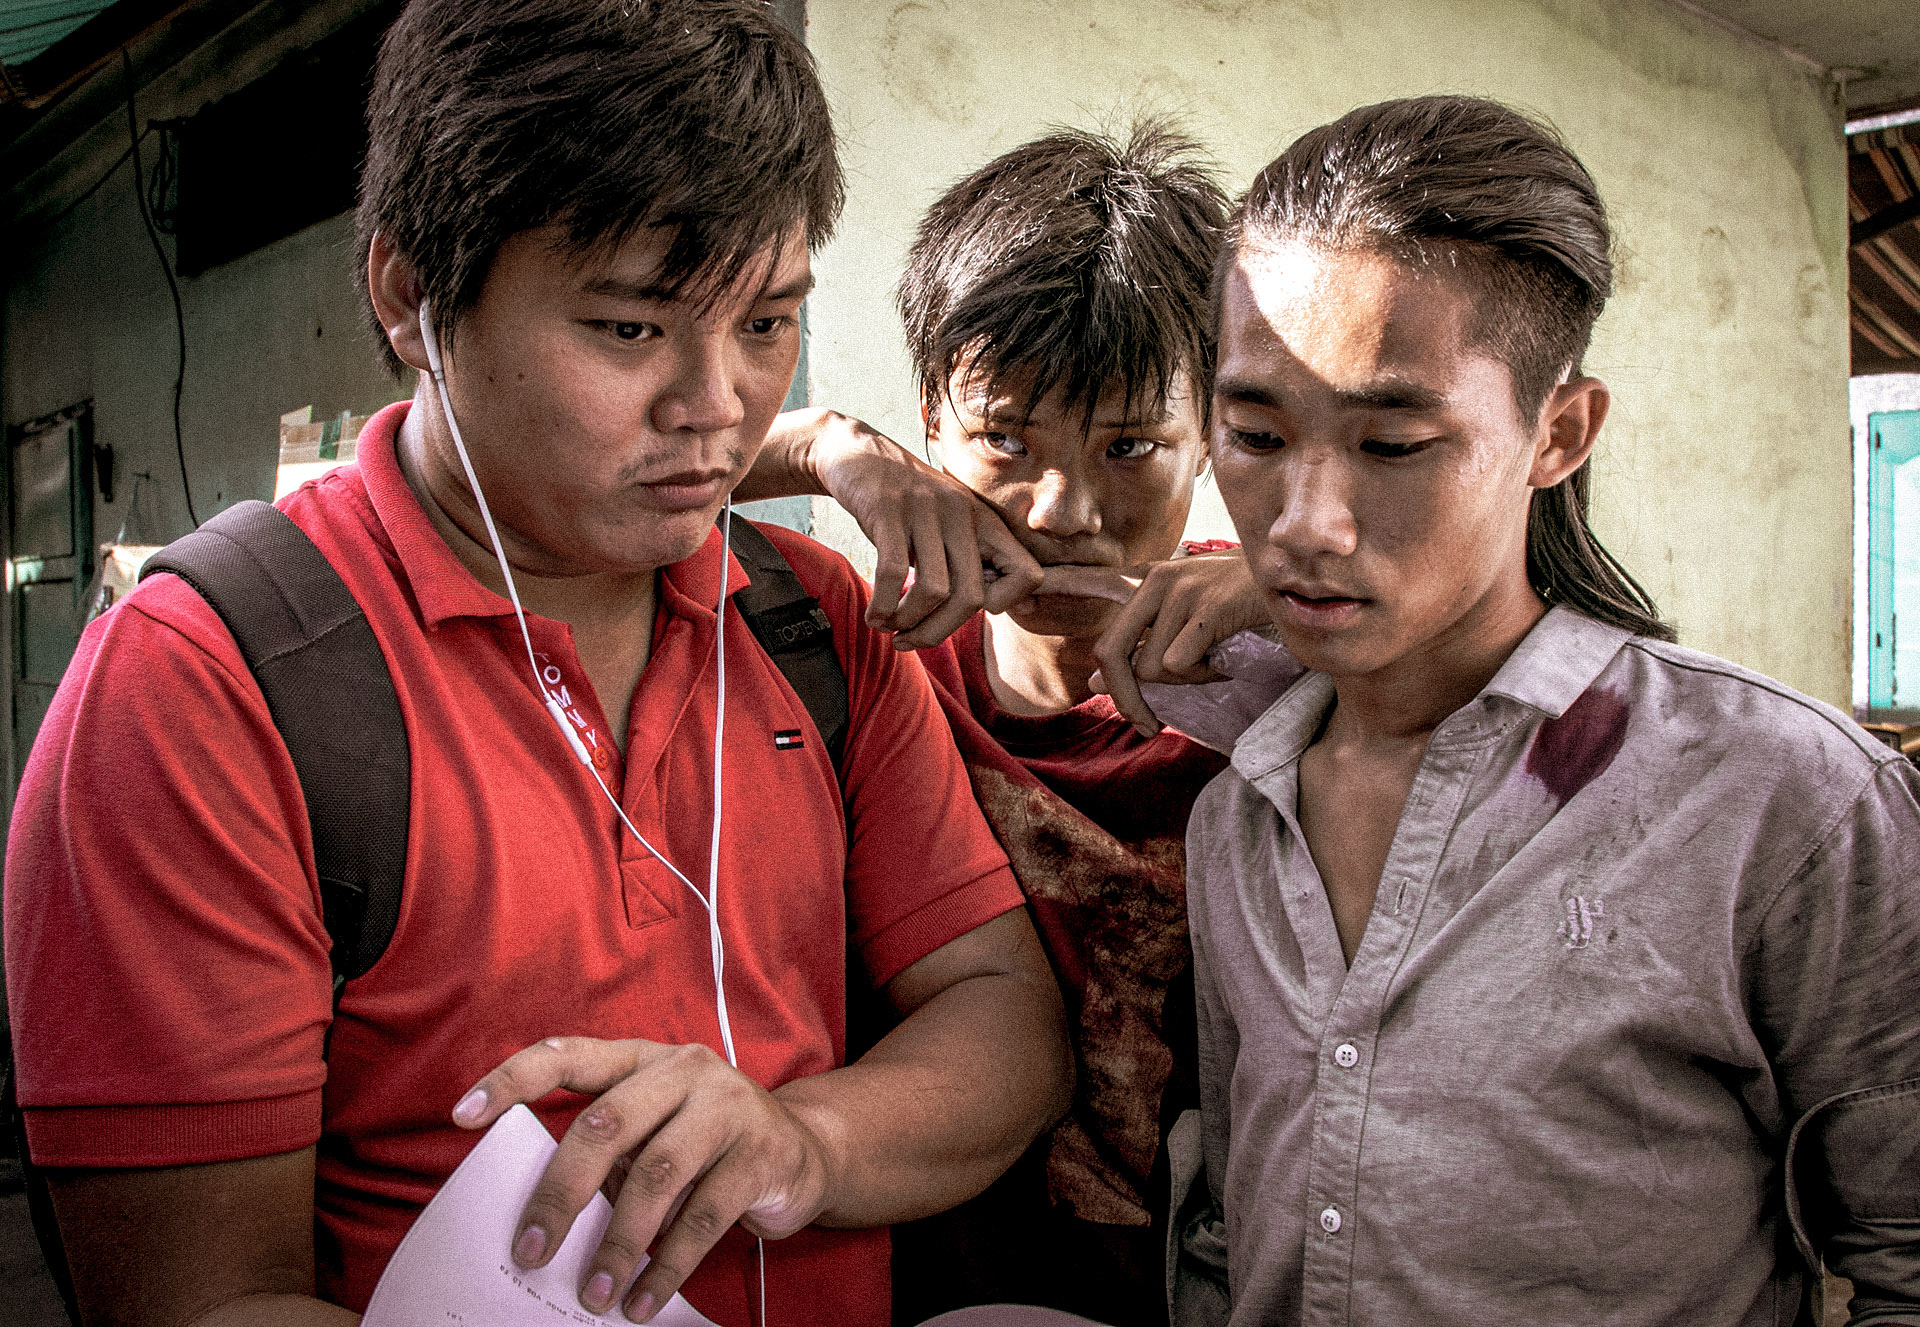 Director Tran Thanh Huy (left) wears earbuds while he stands with actors who play Rom (center) and Phuc on location in this photo supplied by CJ, the film’s distributor in Vietnam.